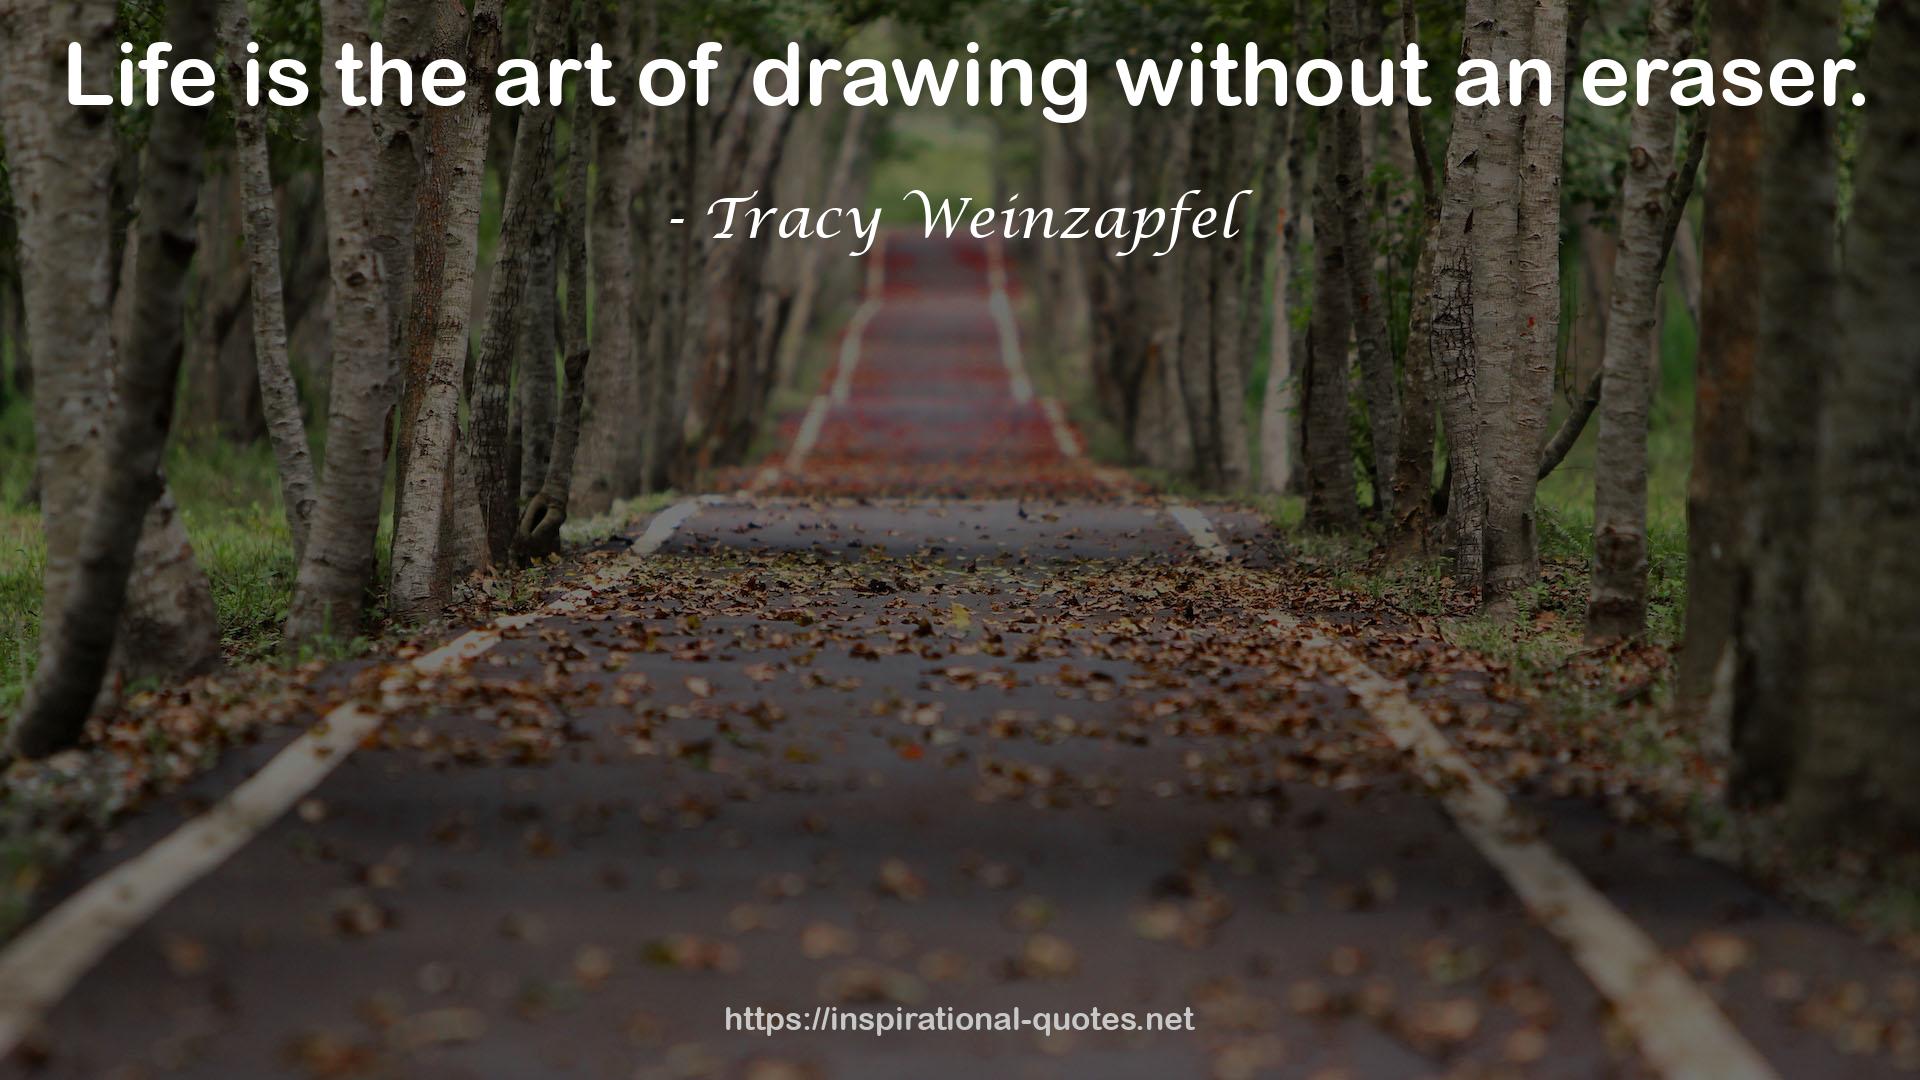 Tracy Weinzapfel QUOTES